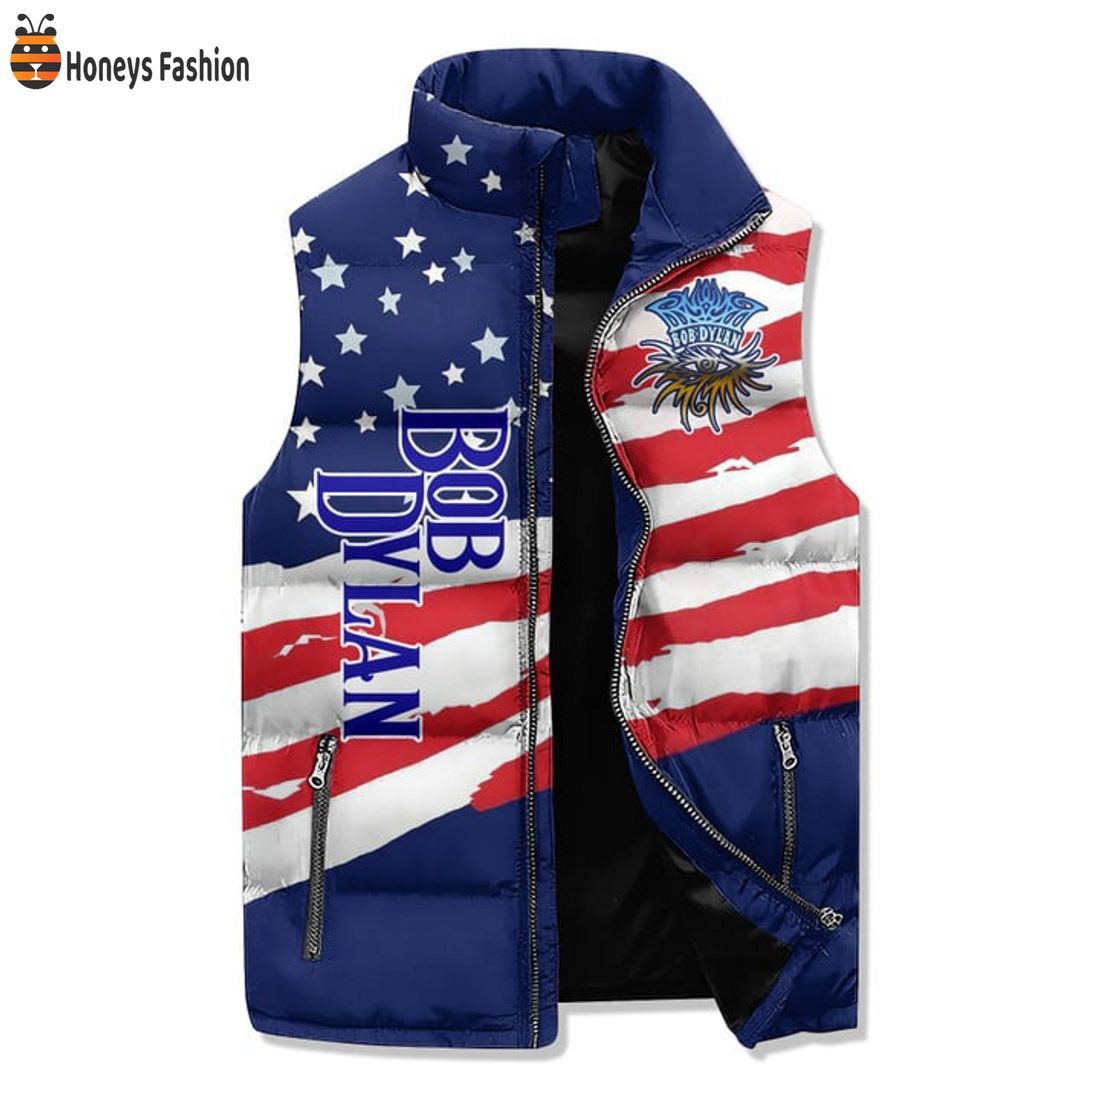 TRENDING Bob Dylan Blowin’ In The Wind American Flag Puffer Sleeveless Jacket